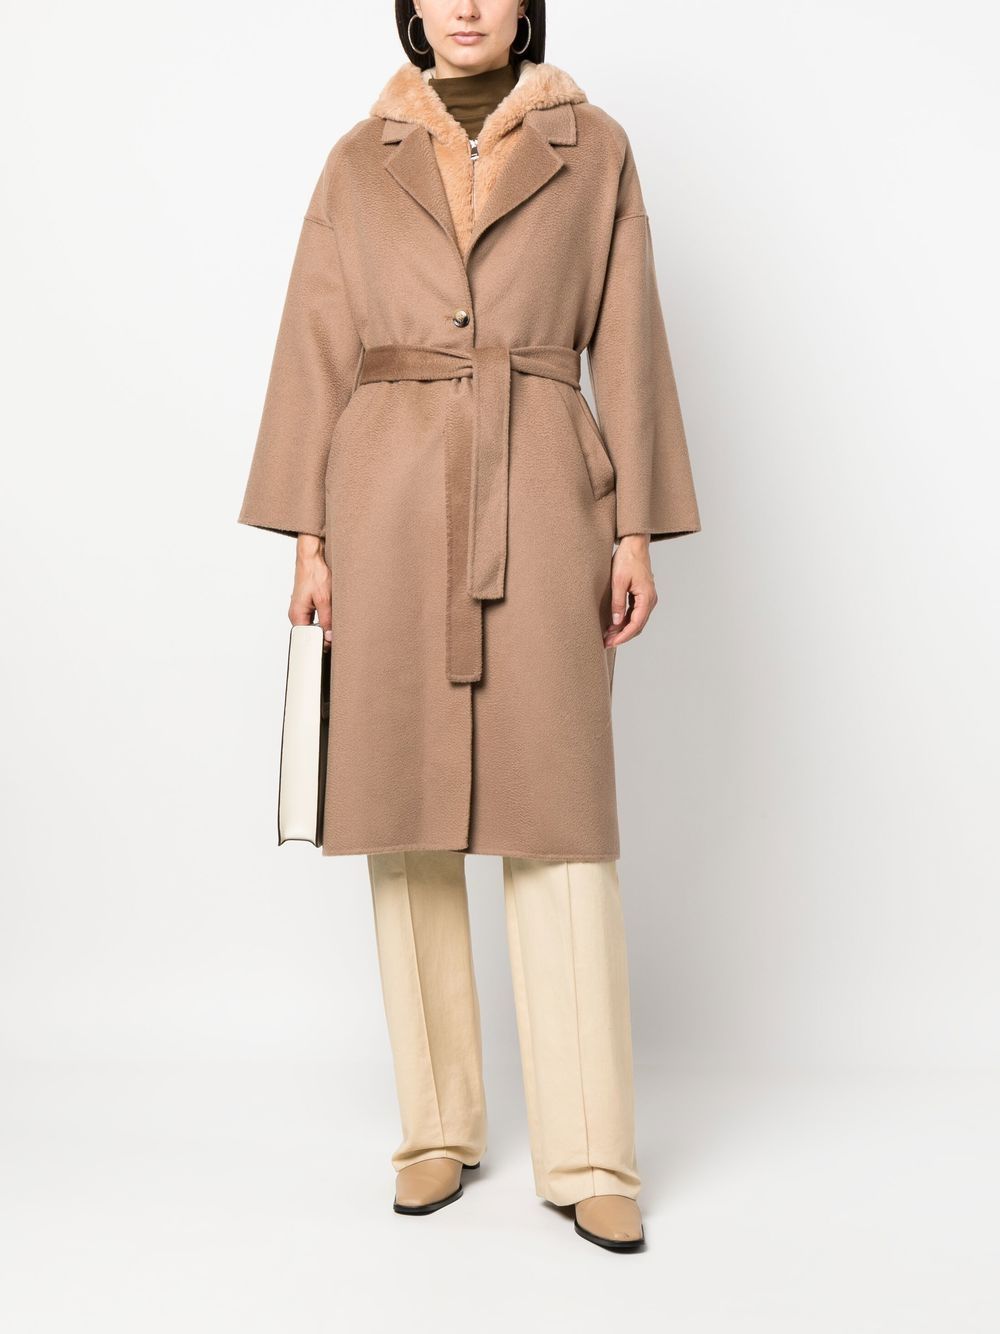 Ava Adore Layered Belted Hooded Coat - Farfetch